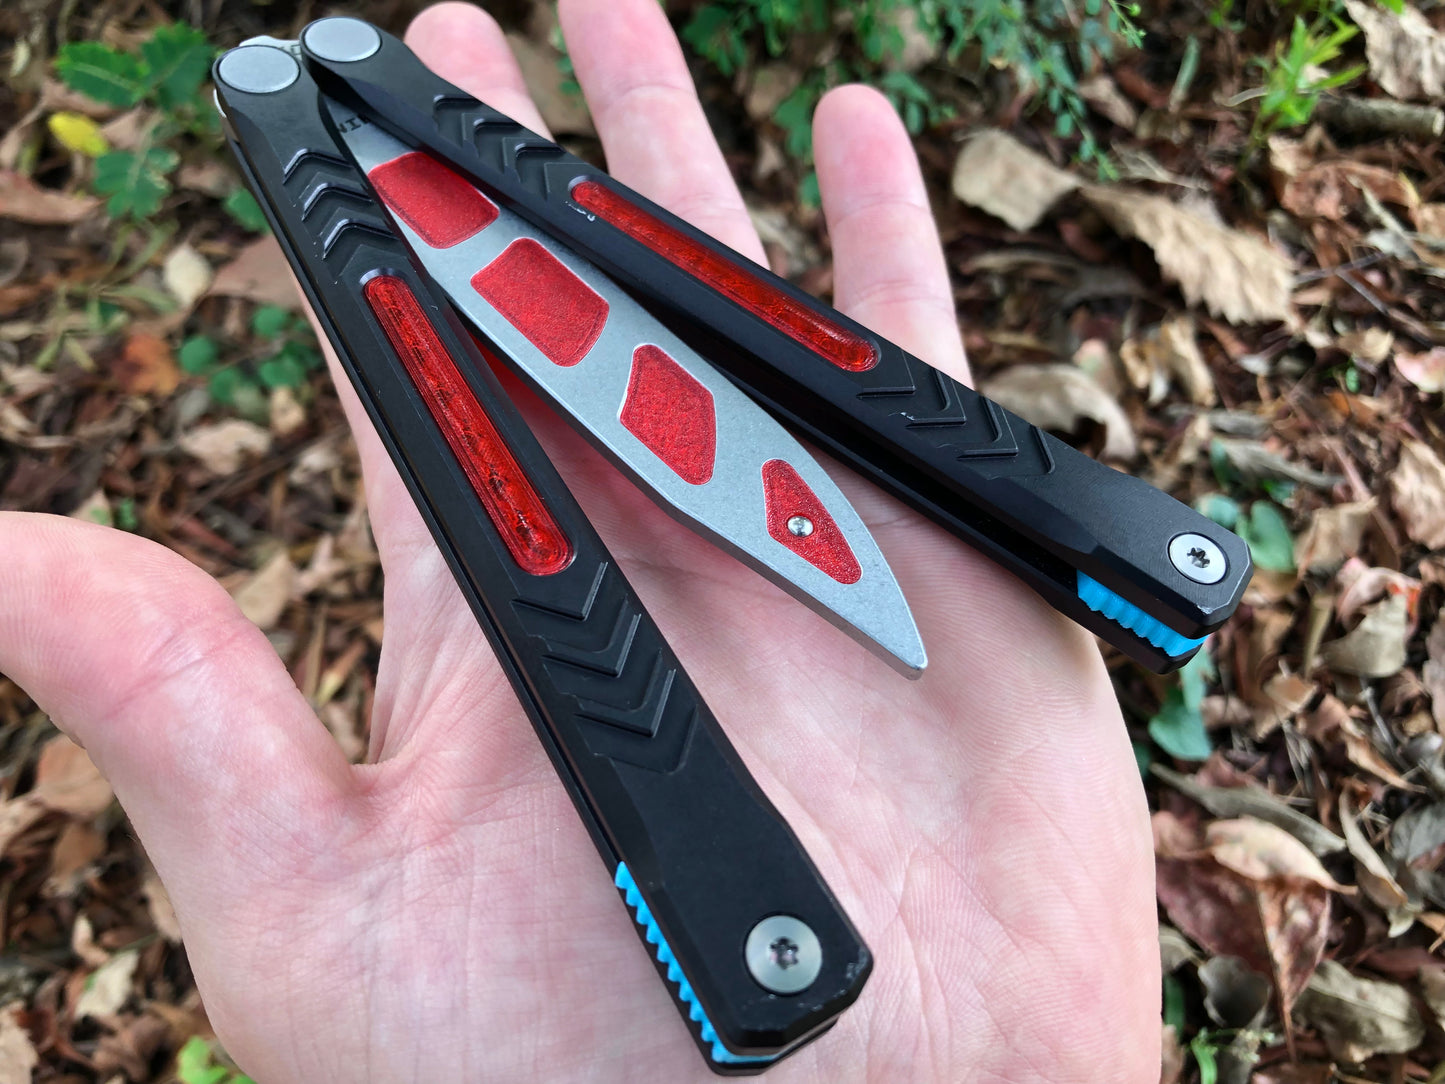 Reduce the handle bias and add grip to your Revo Nexus balisong with Zippy handle inlays and lightweight spacers featuring positive jimping.